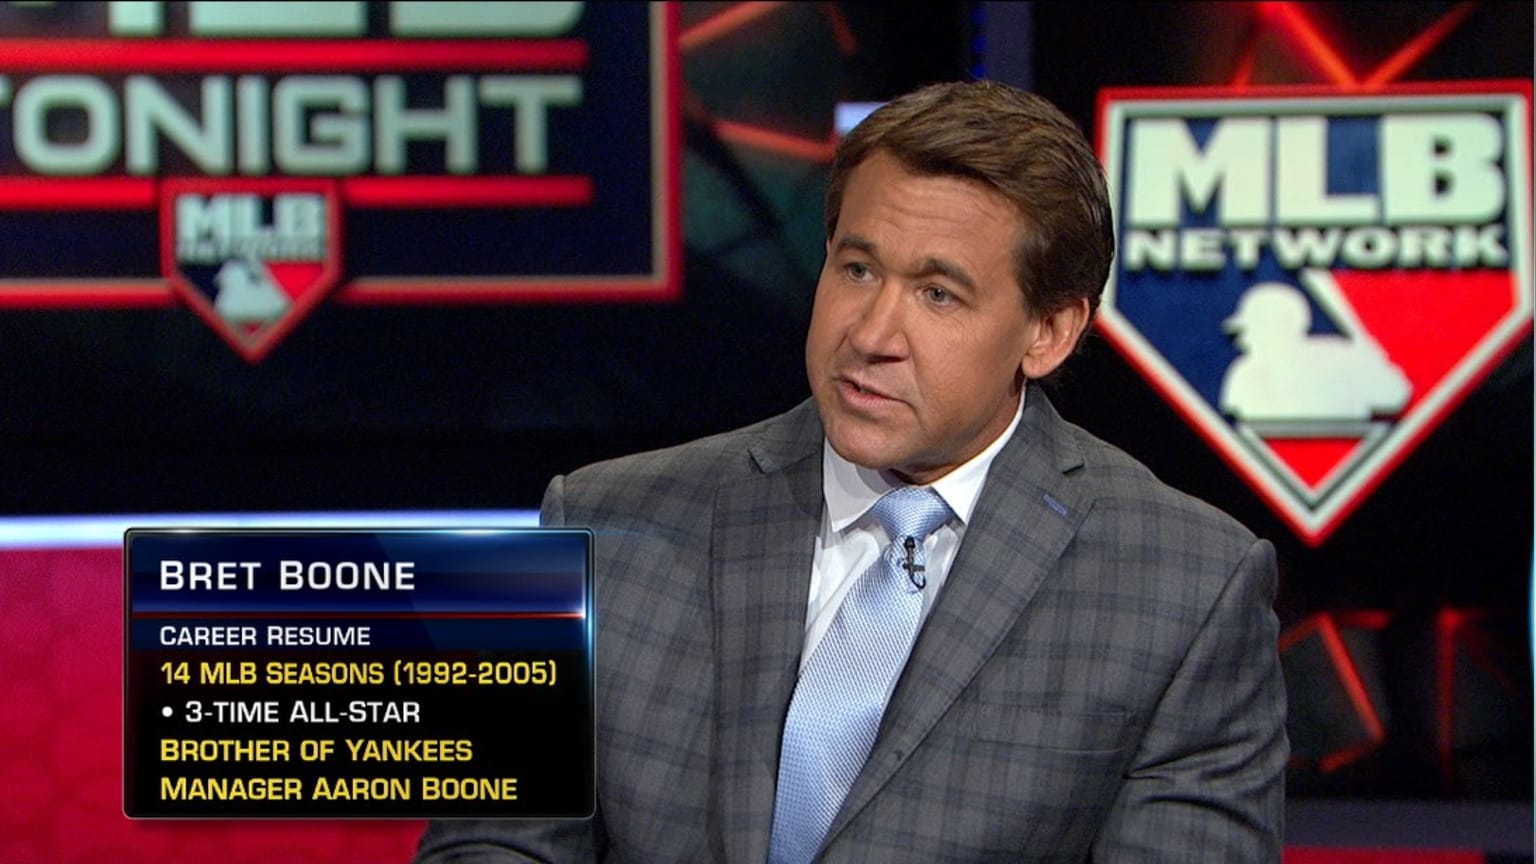 Bret Boone on brother Aaron, 01/30/2020